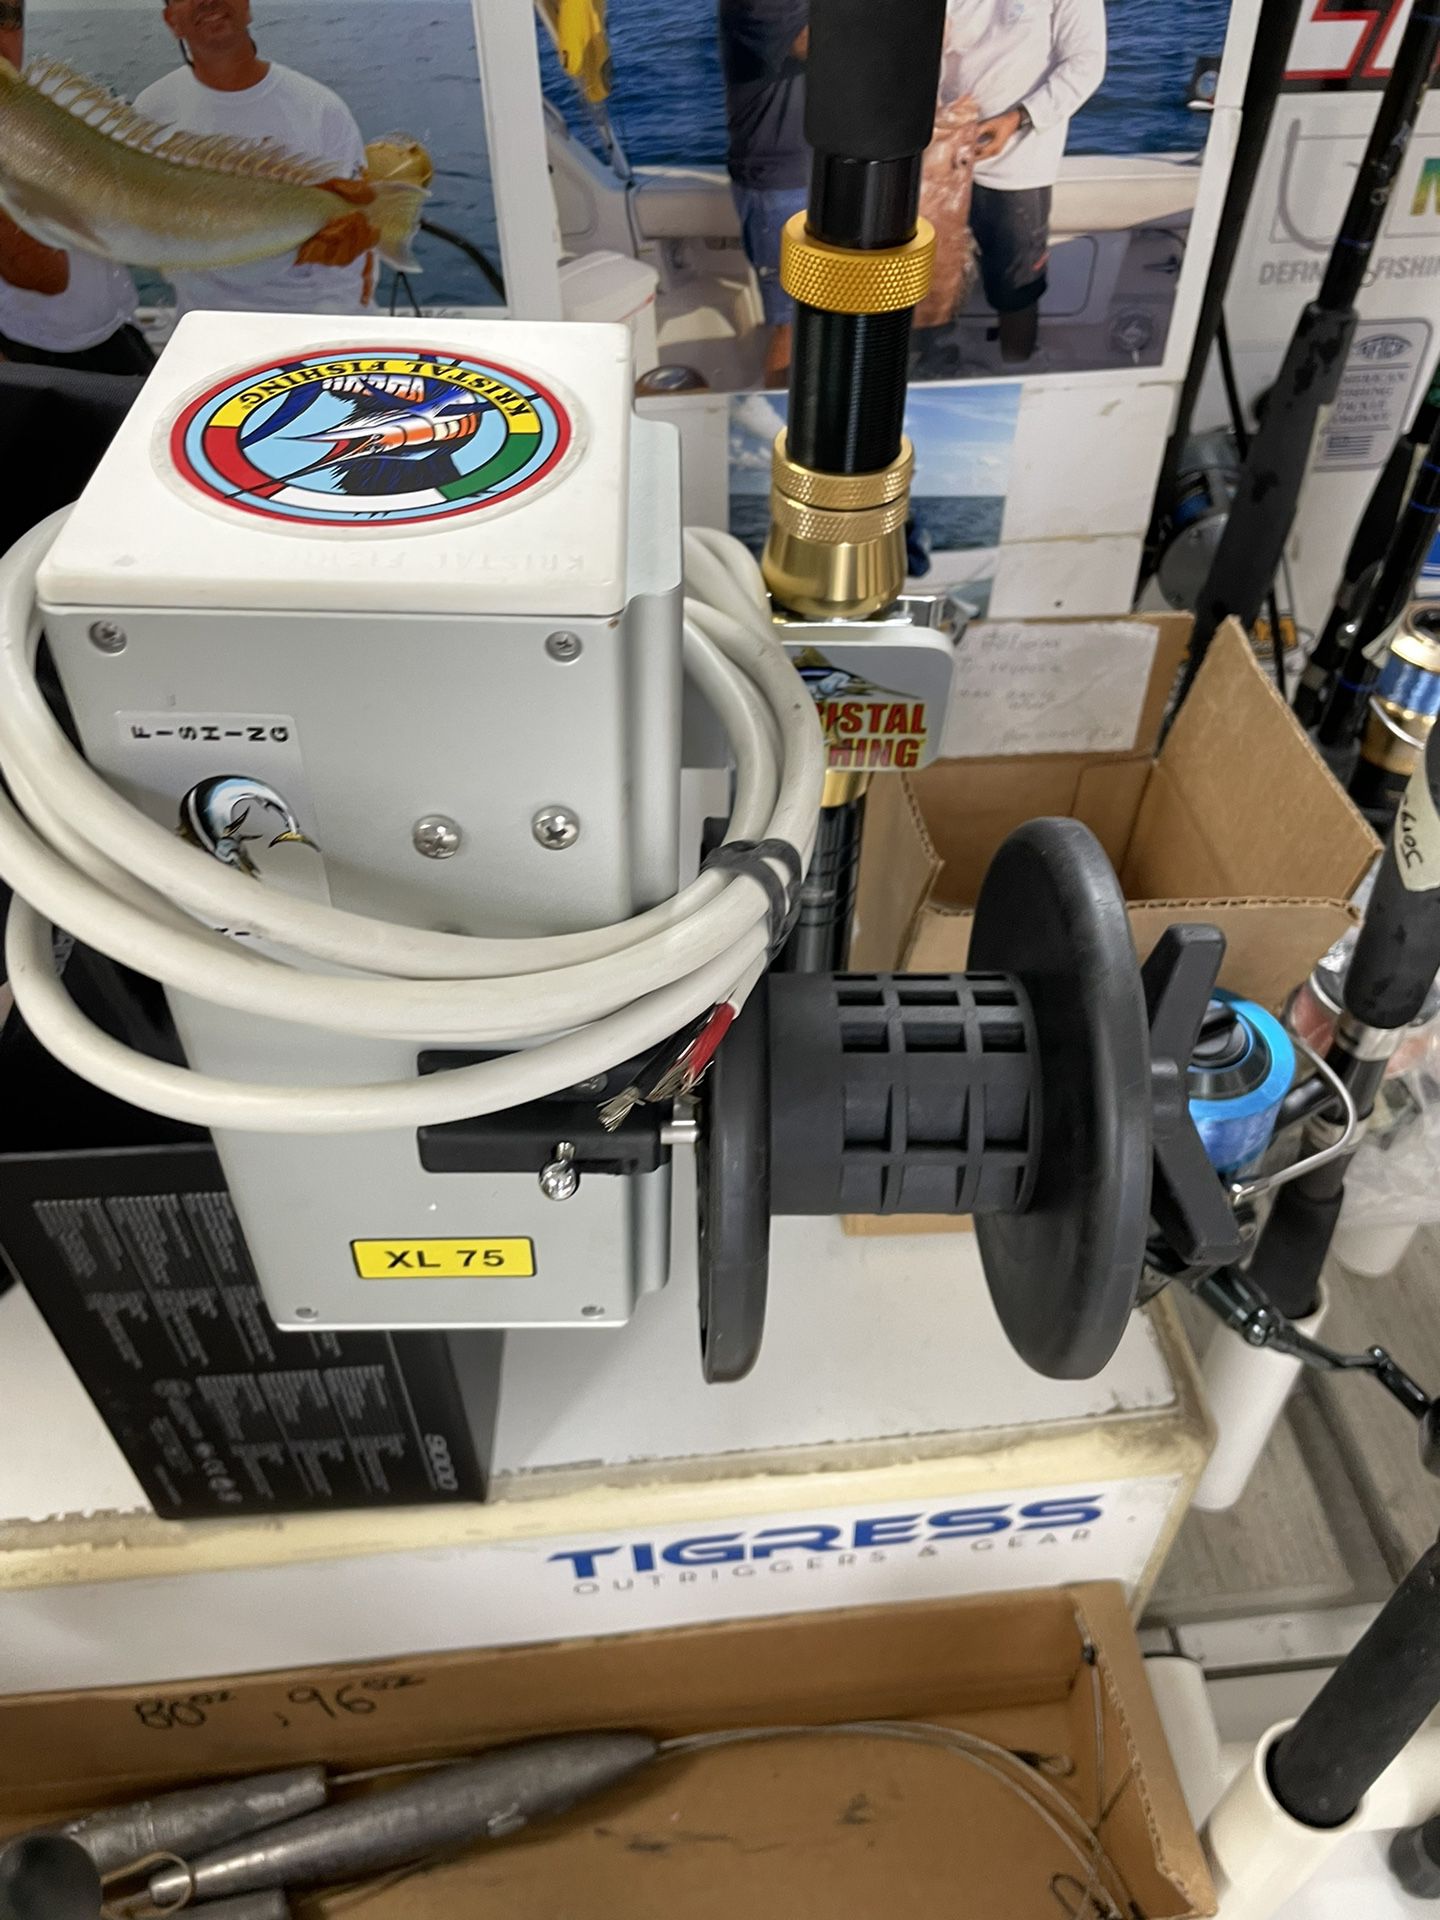 Kristal Fishing XL75 Electric Reel for Sale in Miami, FL - OfferUp